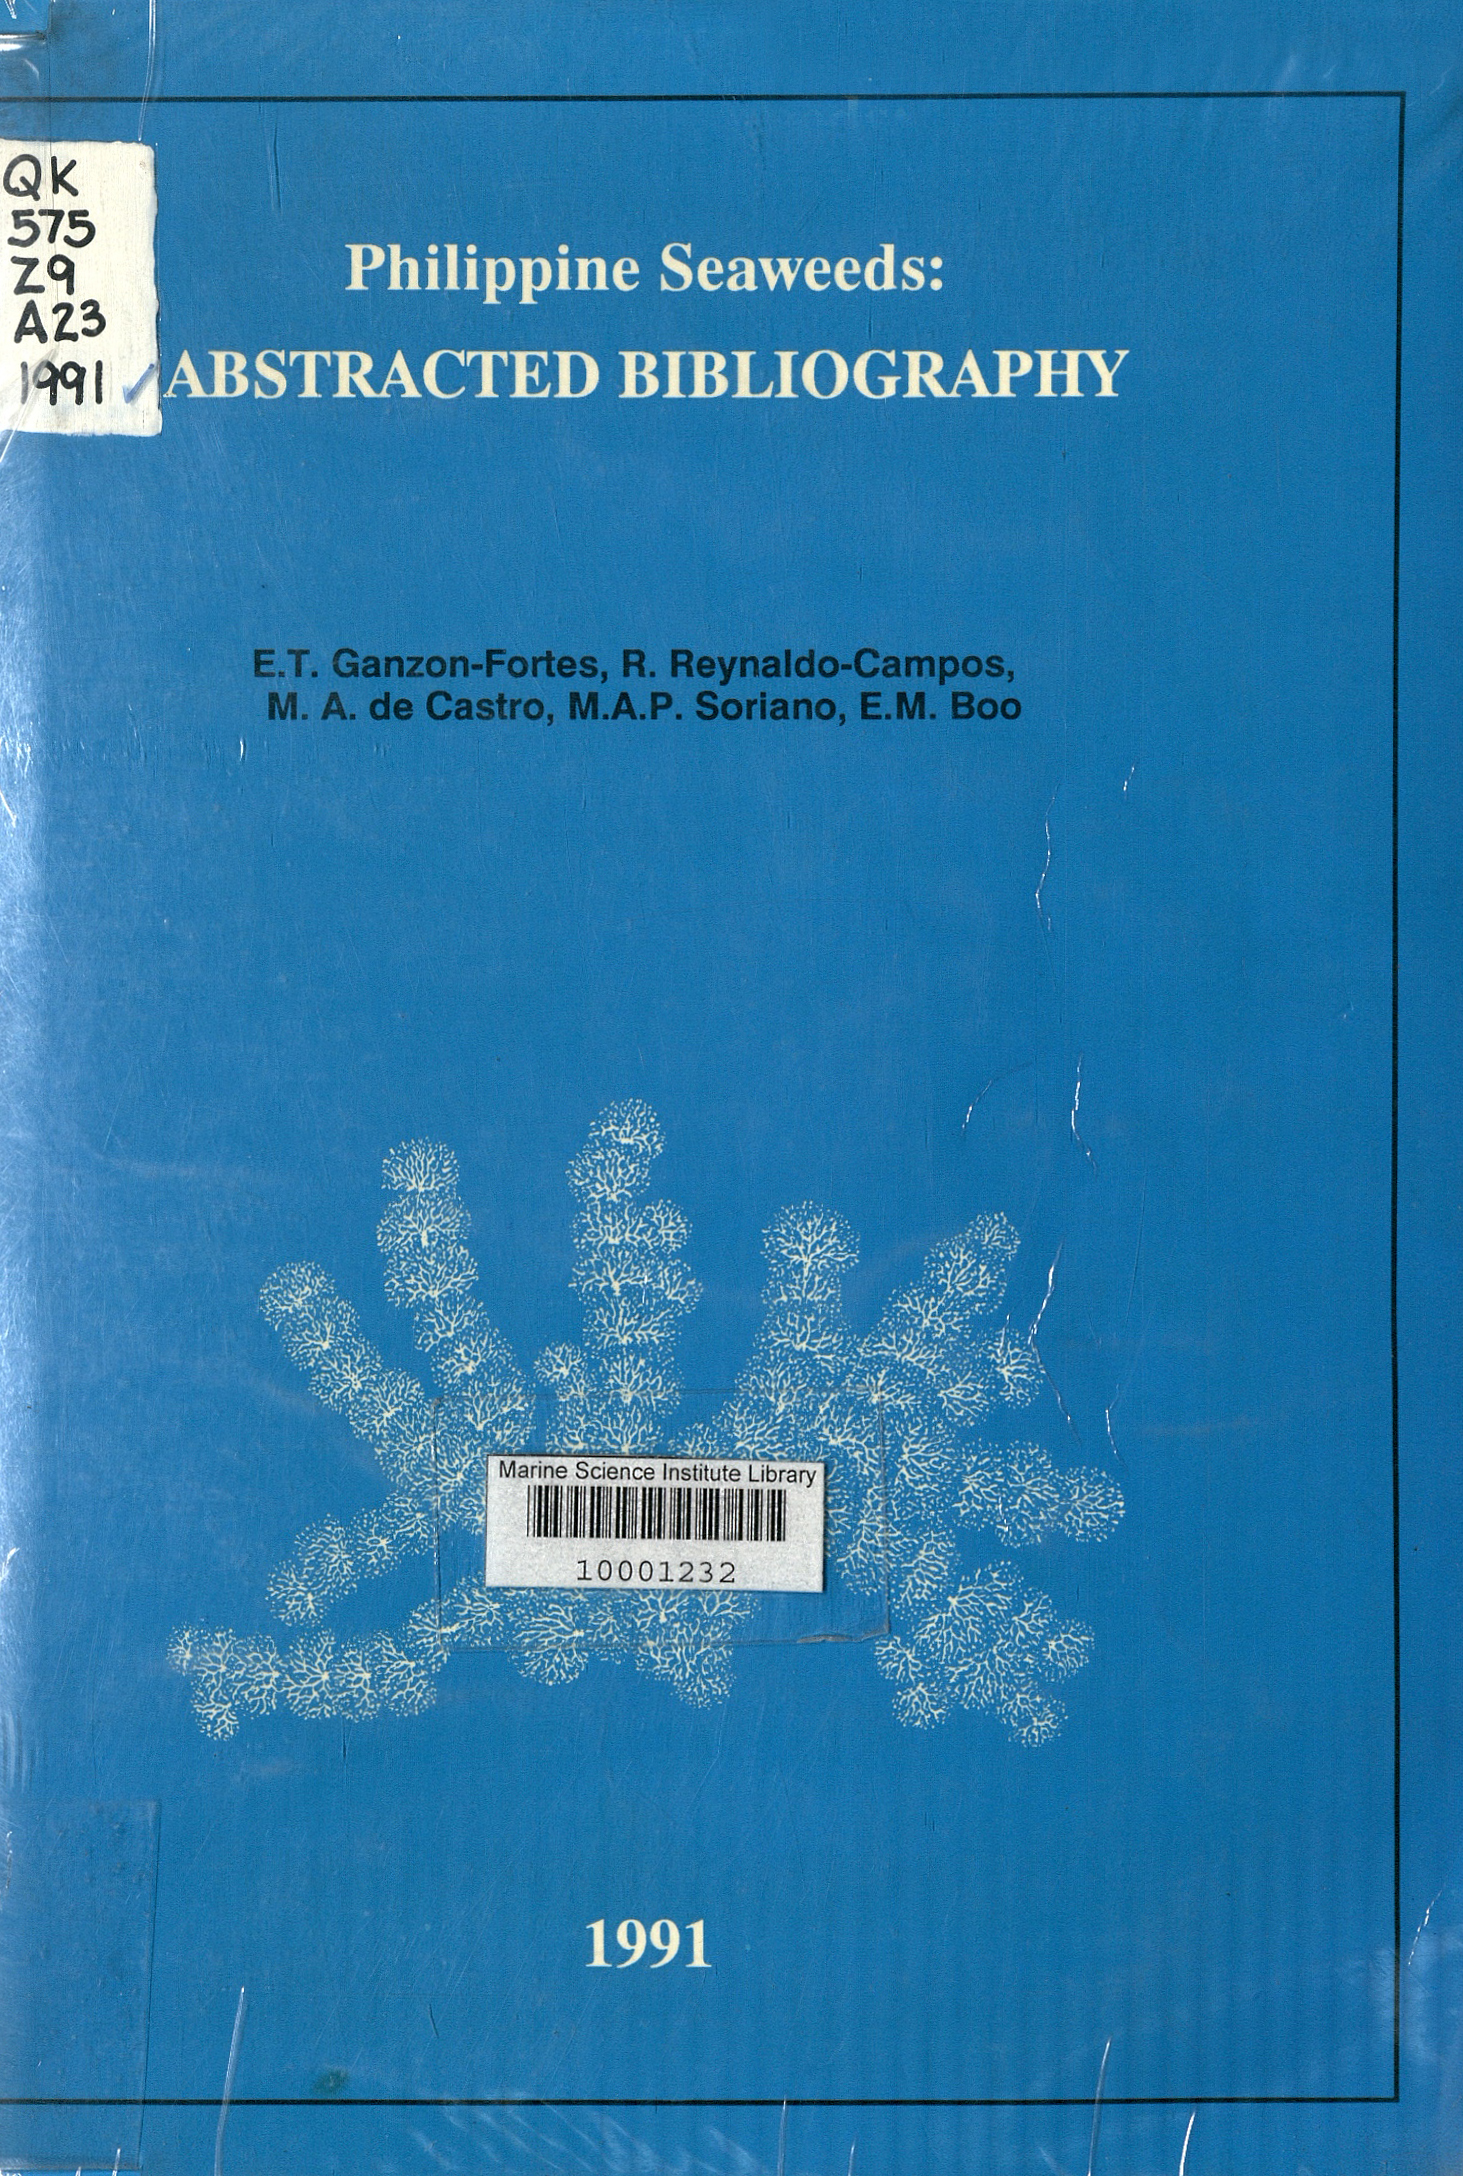 Philippine seaweeds abstracted bibliography.